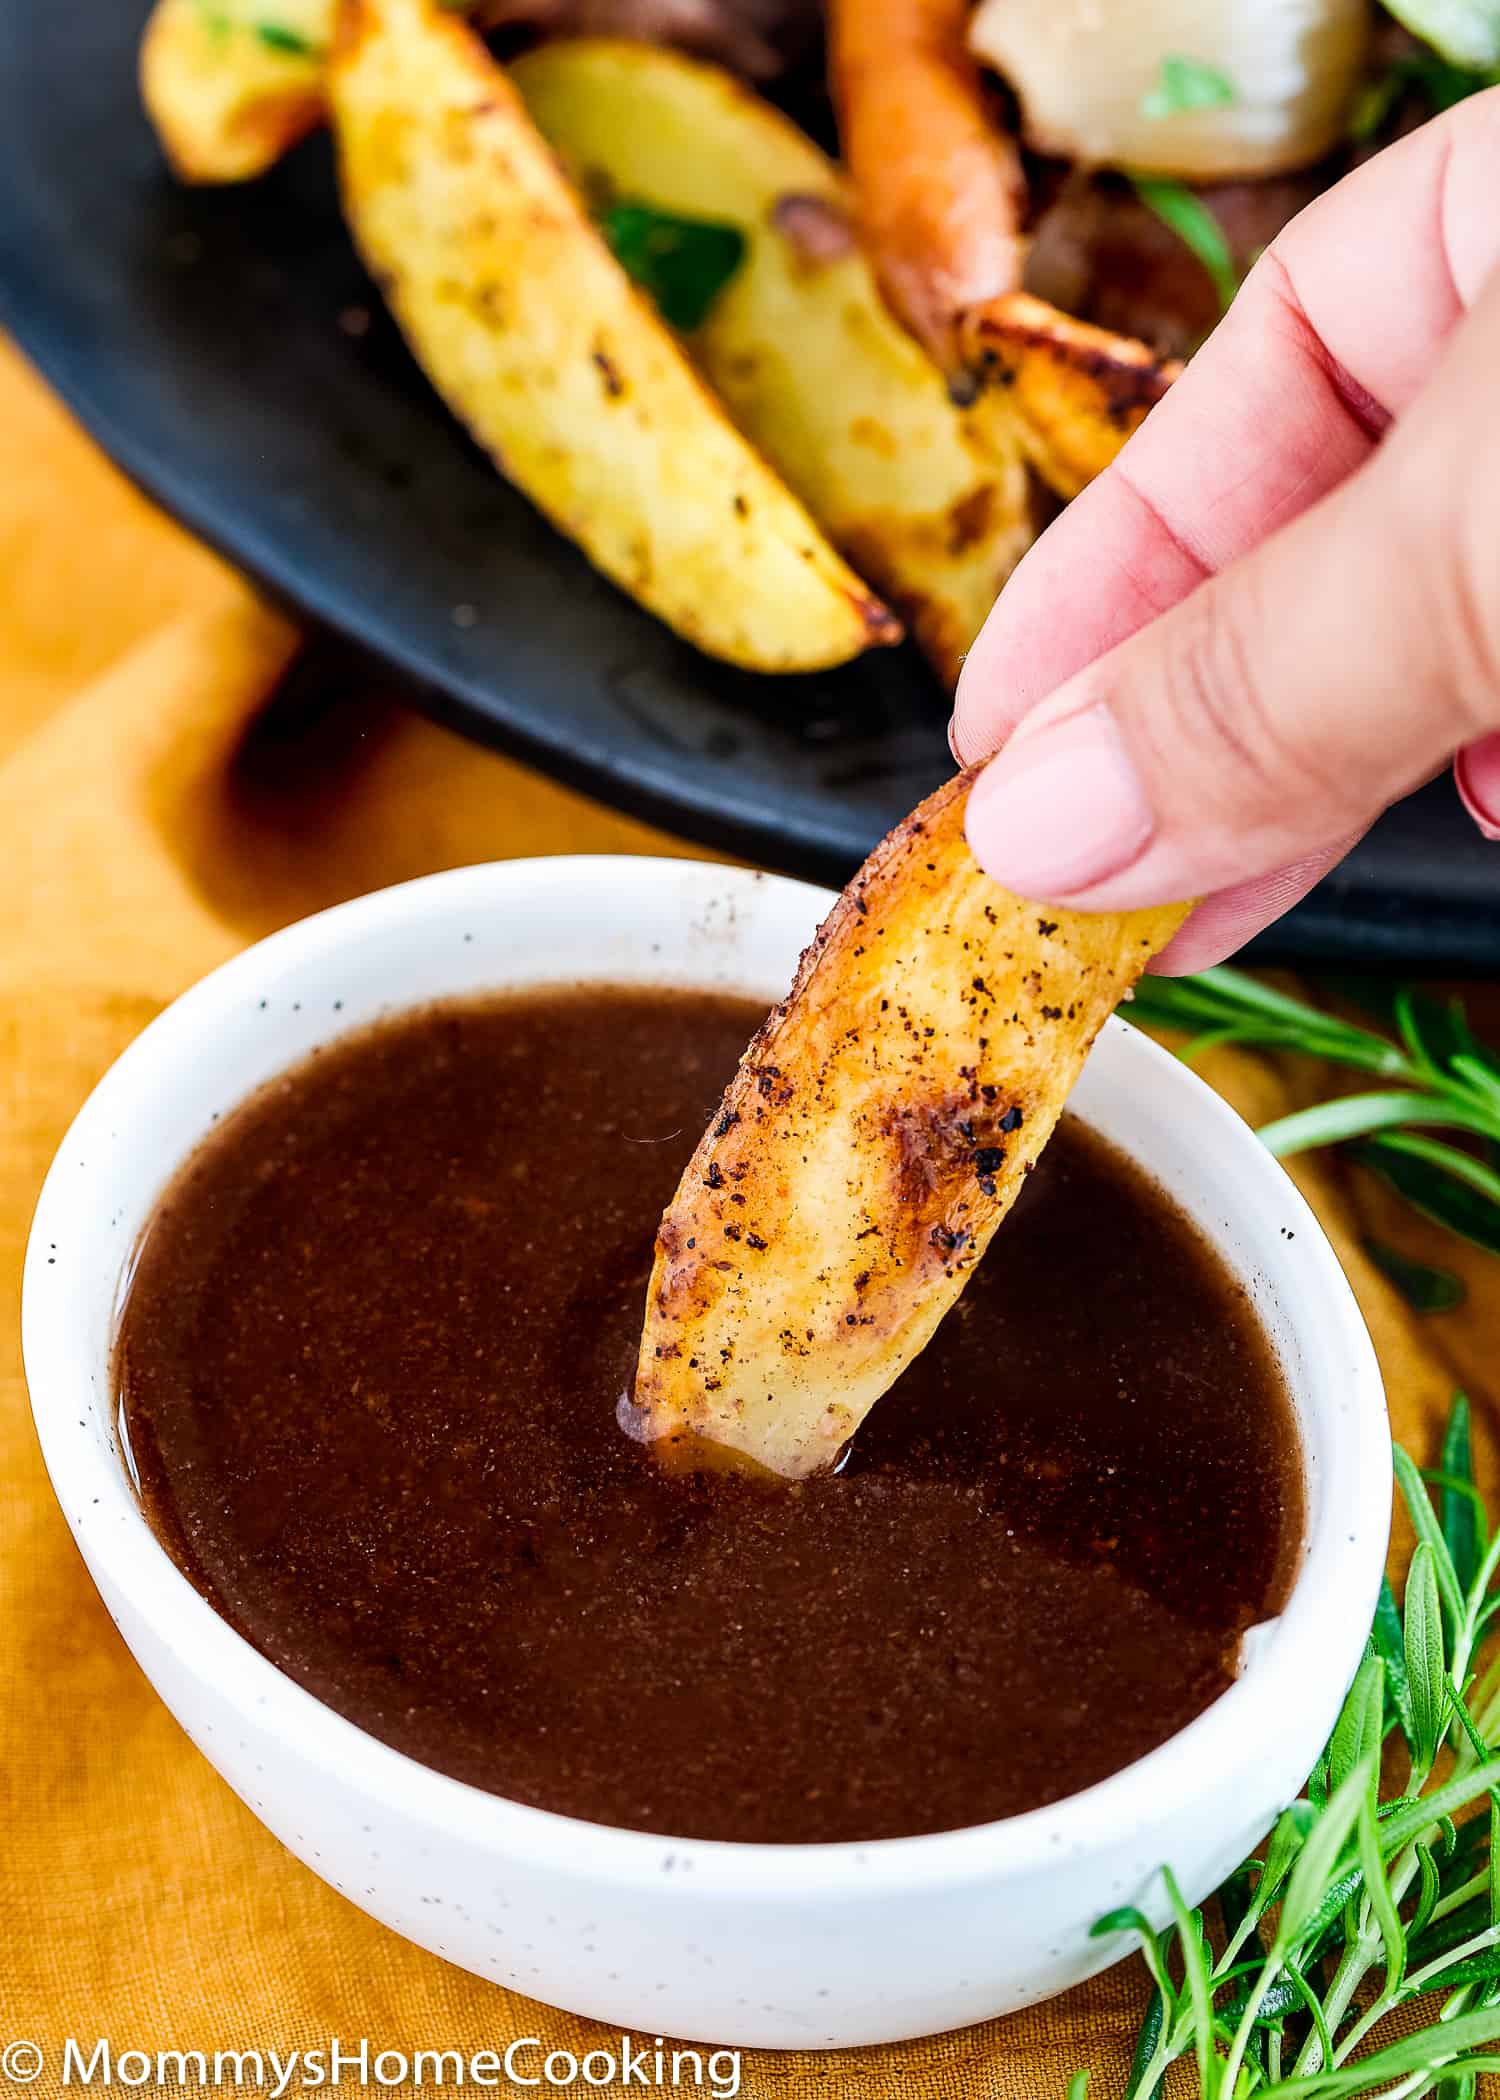 This Slow Cooker Red Wine Hind Shank is rich, hearty and super satisfying. Cook it in a slow cooker for really tender meat, this classic beef stew is enveloped in a tasty, deeply red wine flavored sauce. https://mommyshomecooking.com